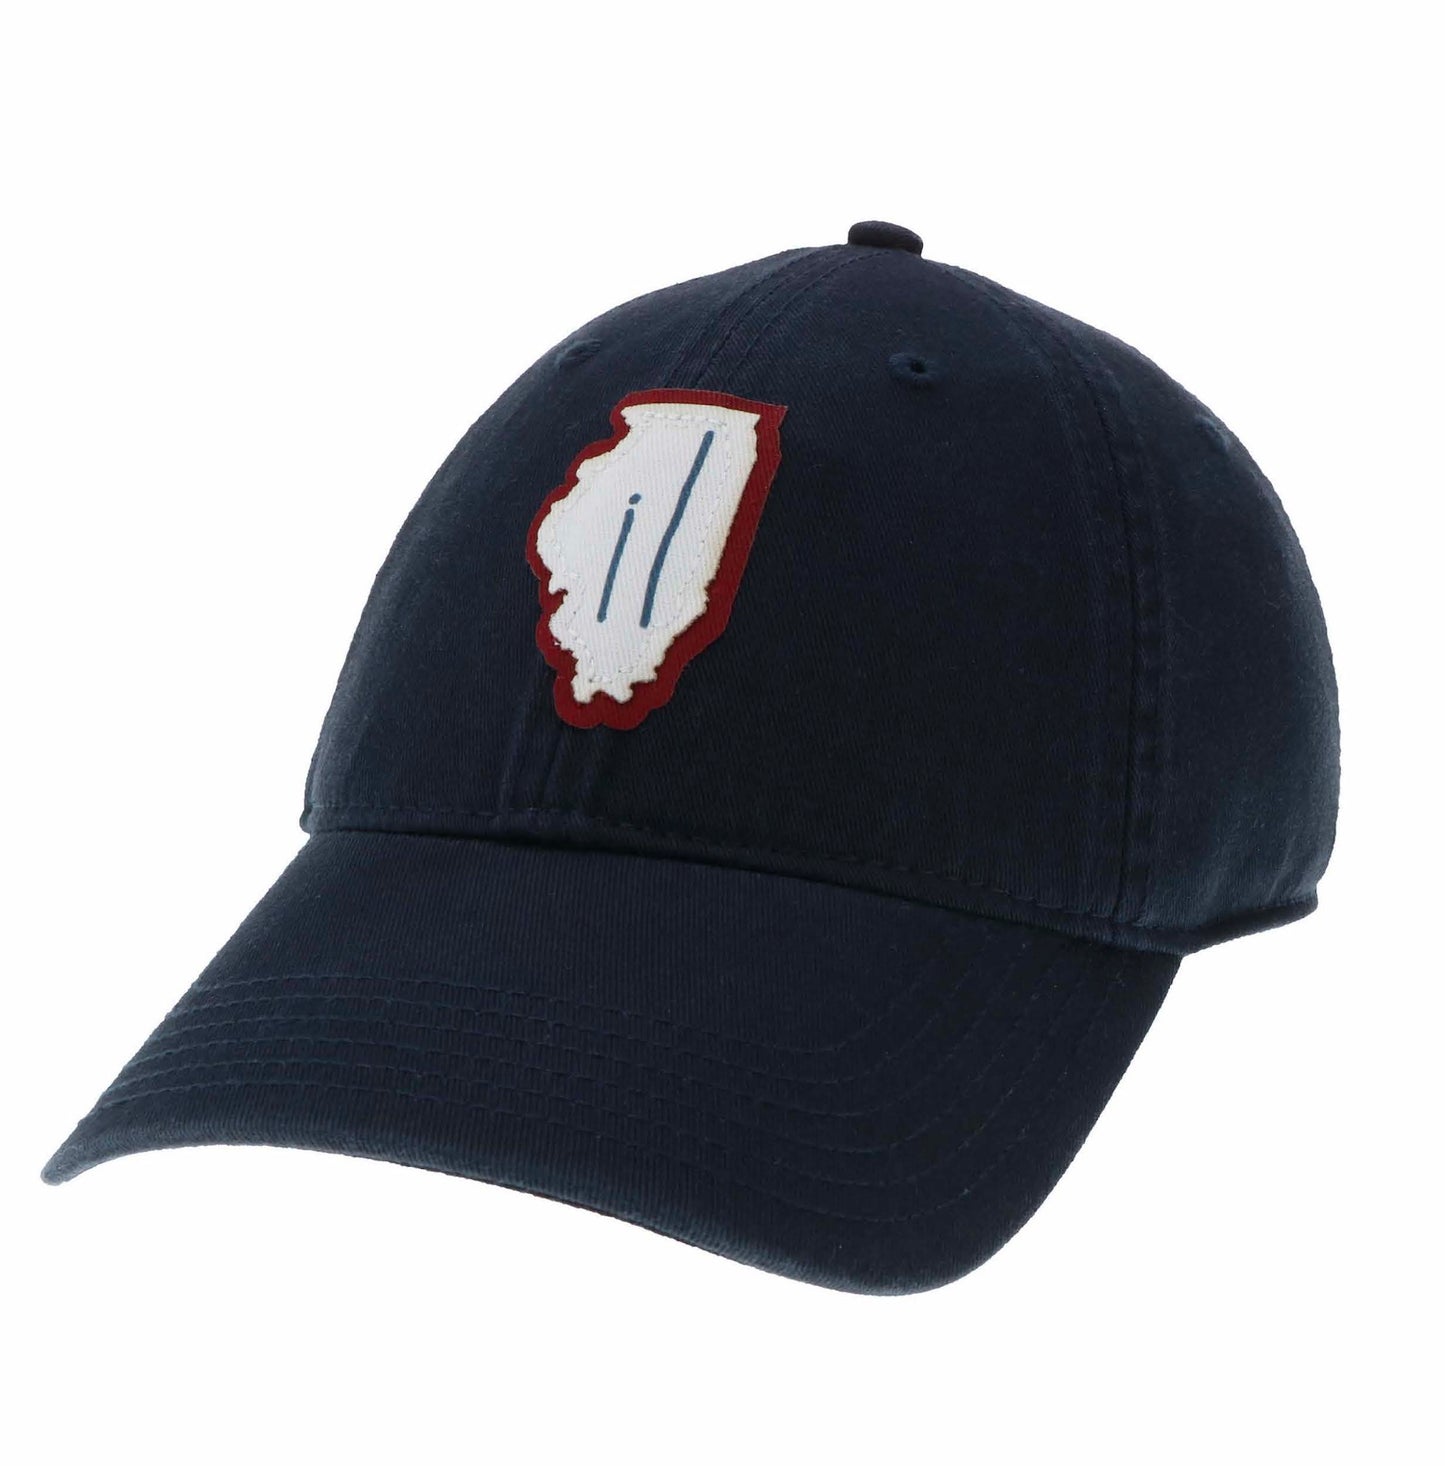 Illinois Relax Twill Hat in Navy